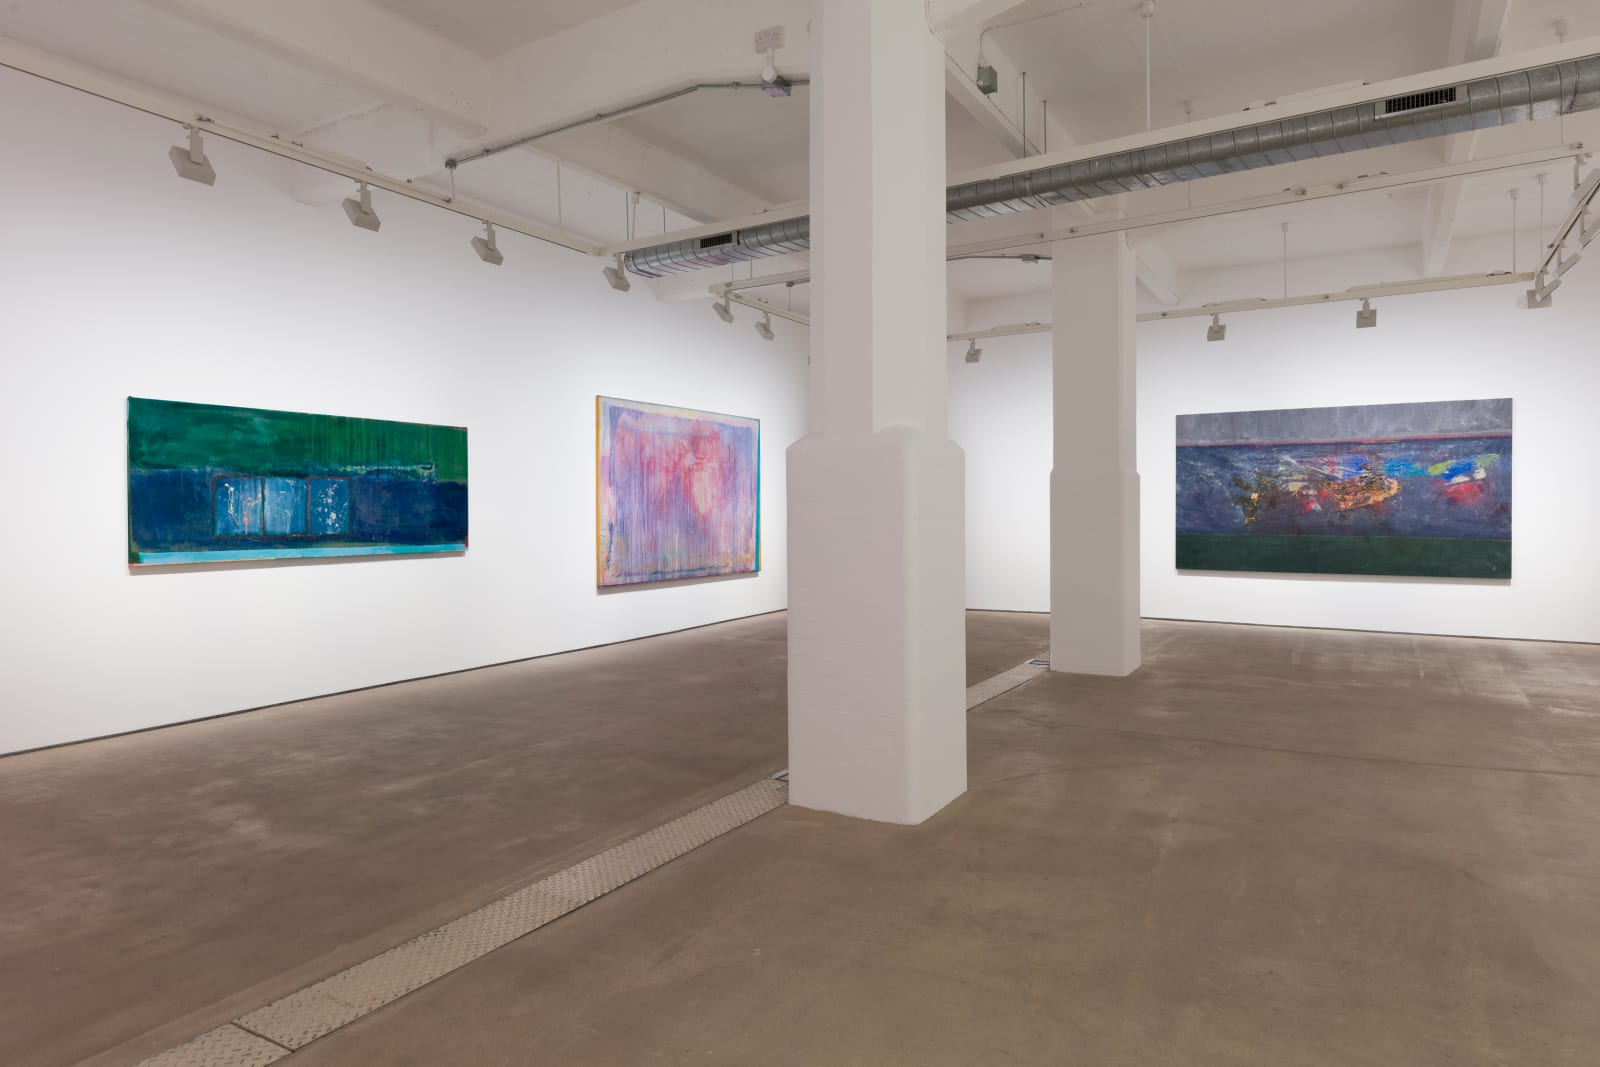 Frank Bowling, Installation view 'More Land than Landscape', Hales London, 10 May - 22 June 2019